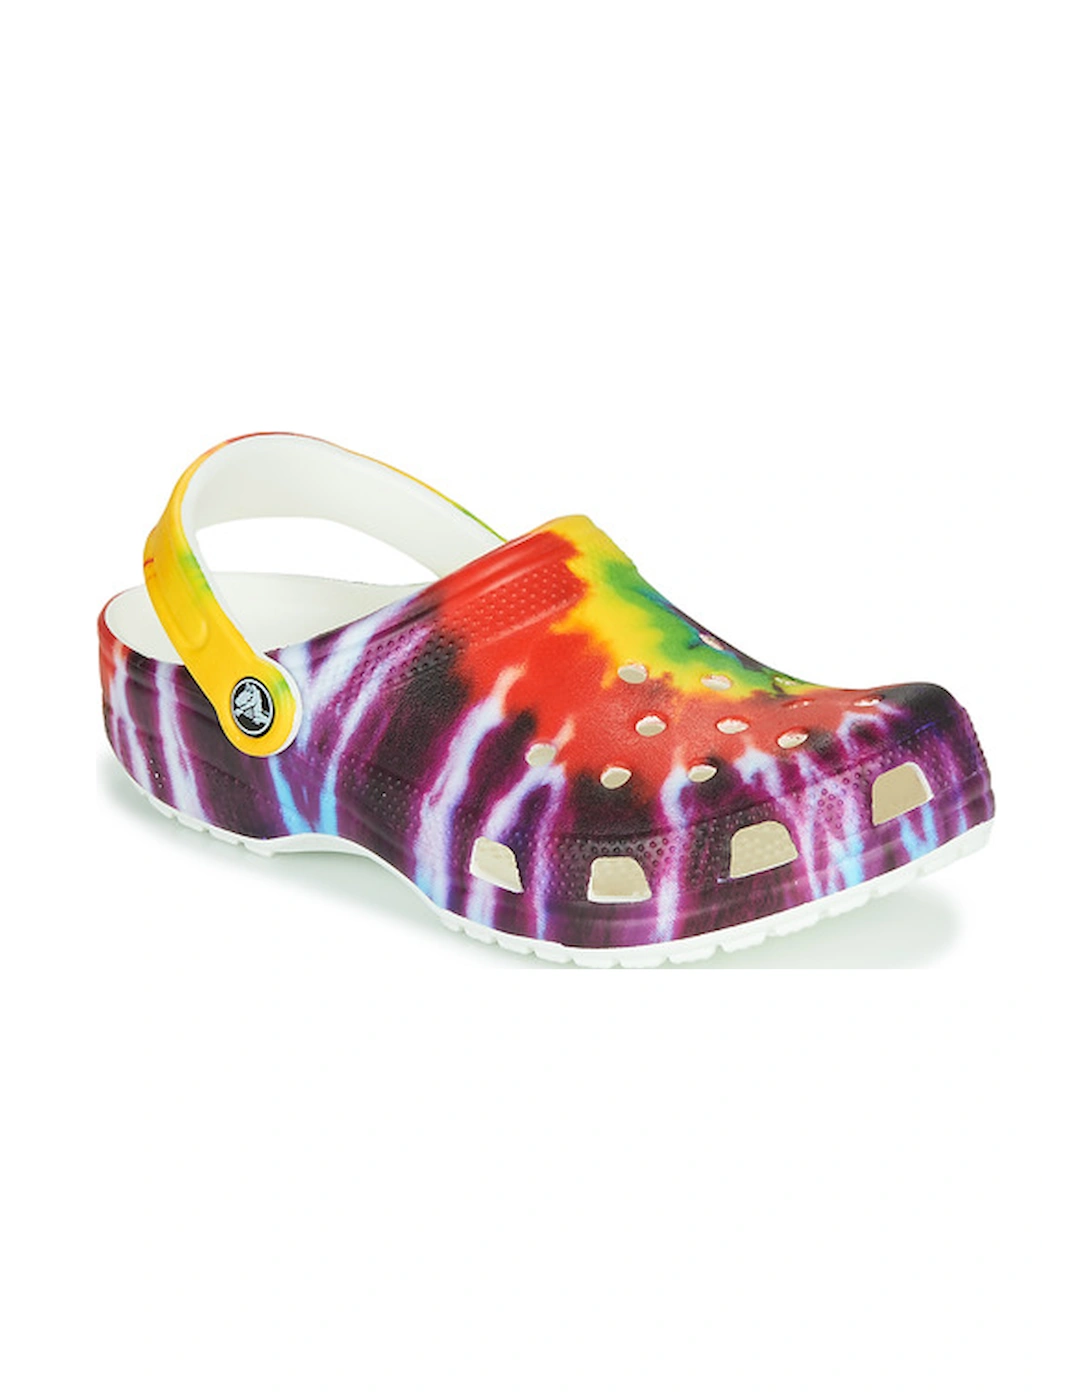 CLASSIC TIE DYE GRAPHIC CLOG, 9 of 8